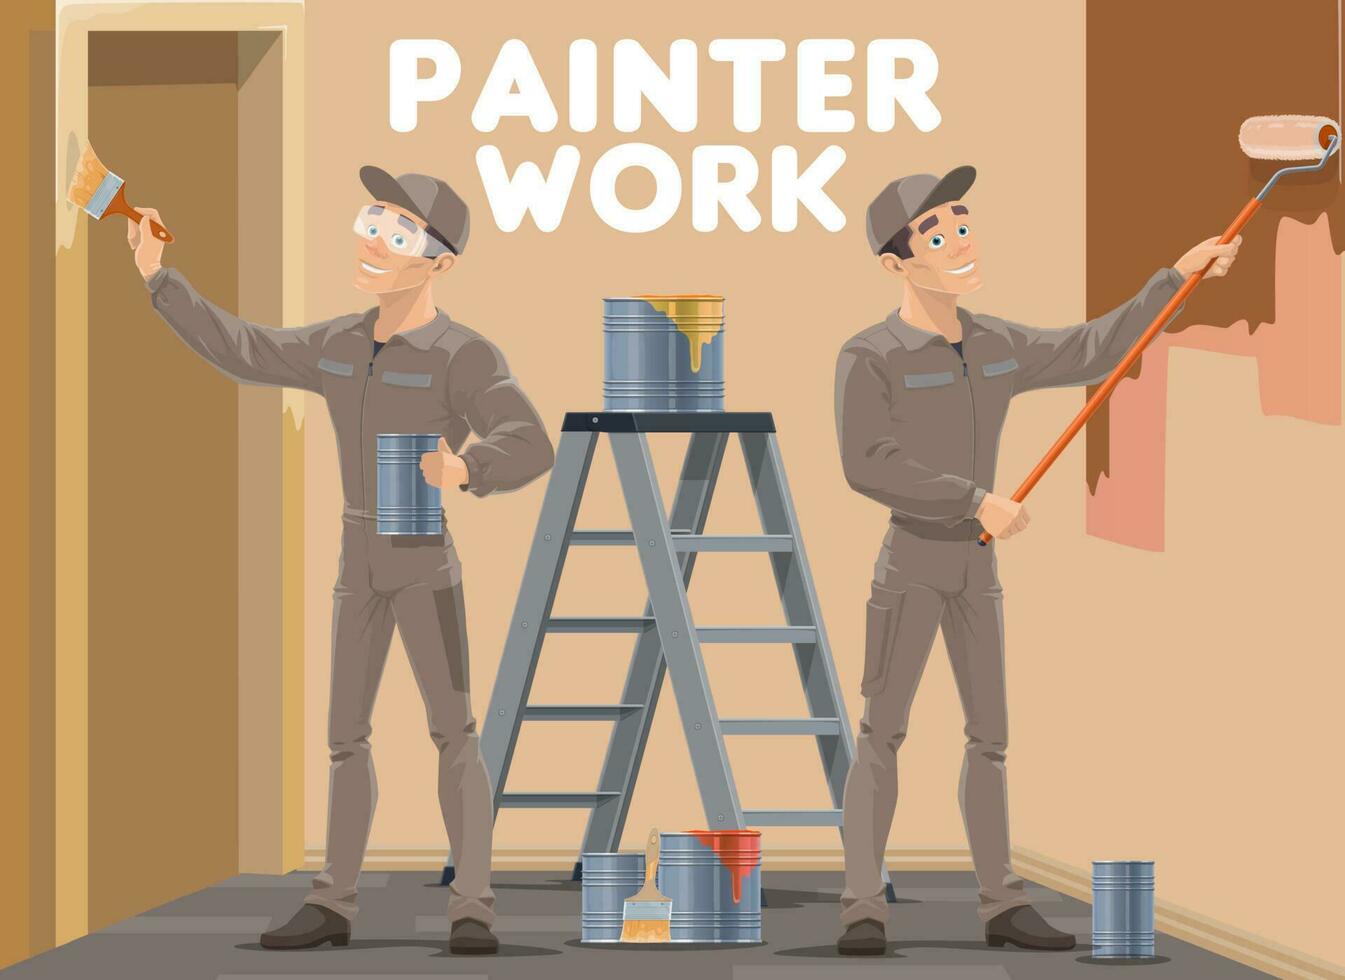 House room wall painting service work vector